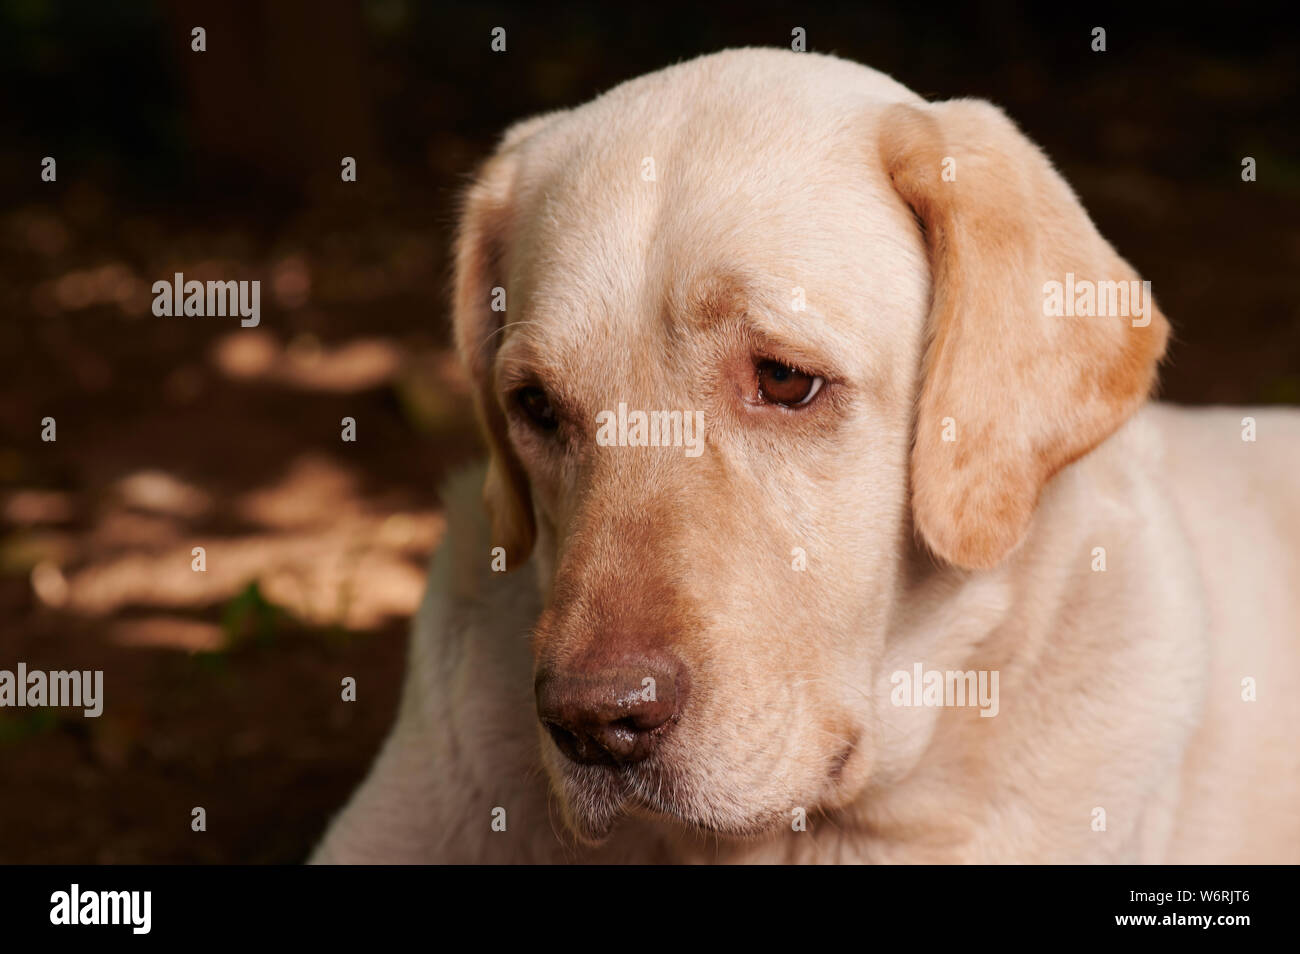 Portrait of sweet labrador dog close up view on sunset background Stock Photo